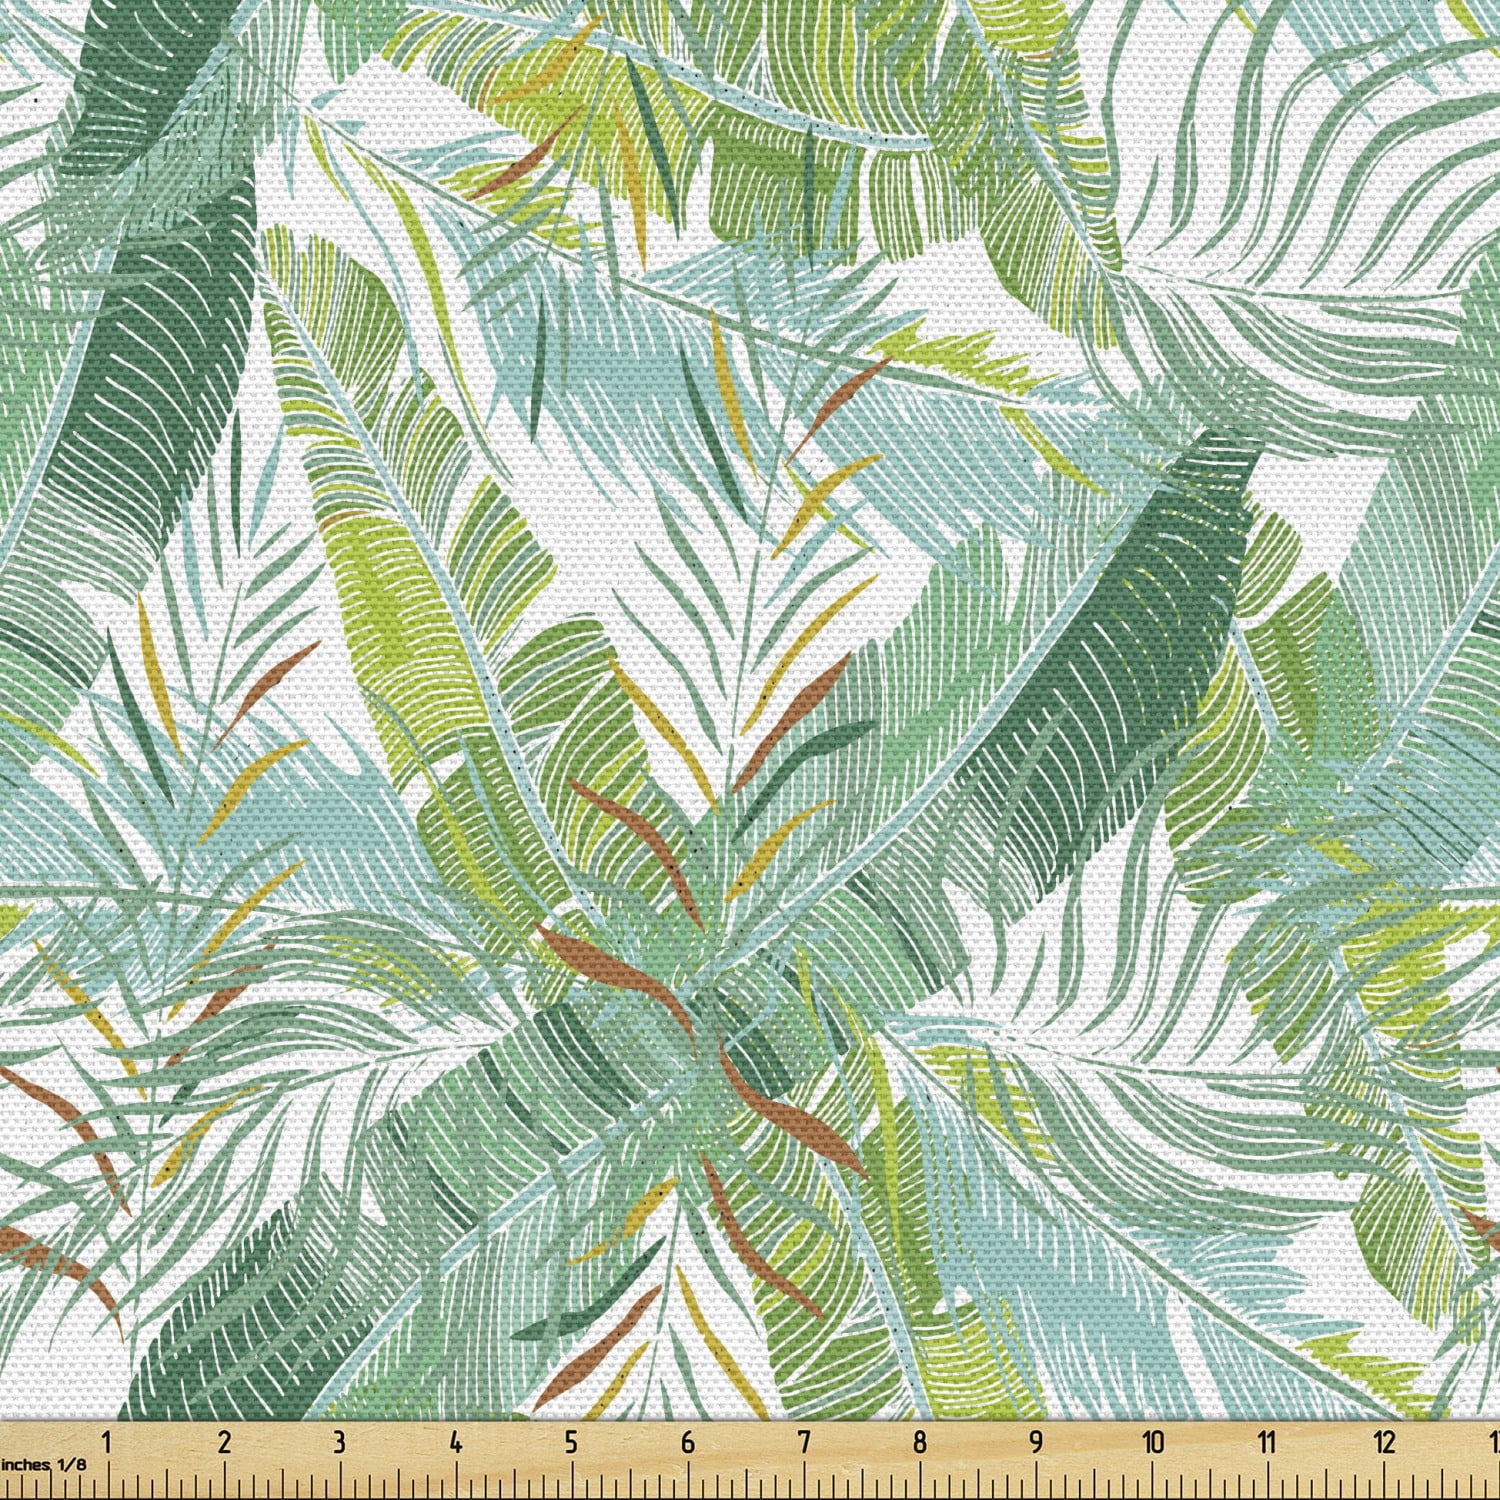 Exotic Fabric by the Yard Botanical Graphic with Creative Tropical ...